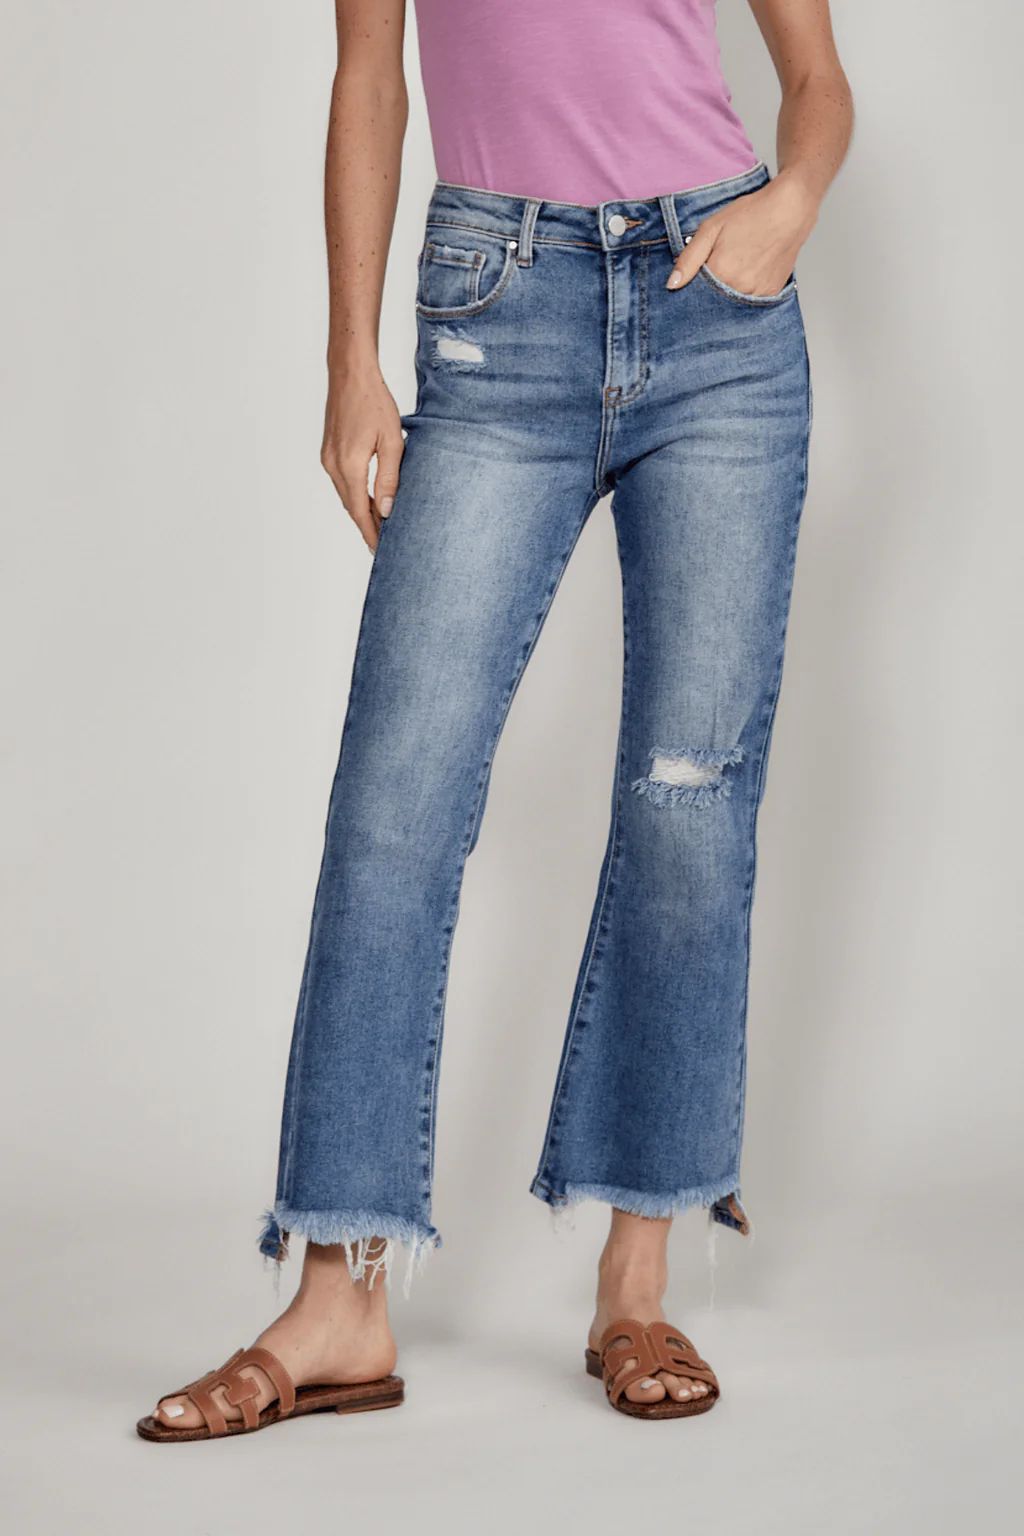 Risen Paige High Rise Distressed Kick Flare Jeans | Social Threads